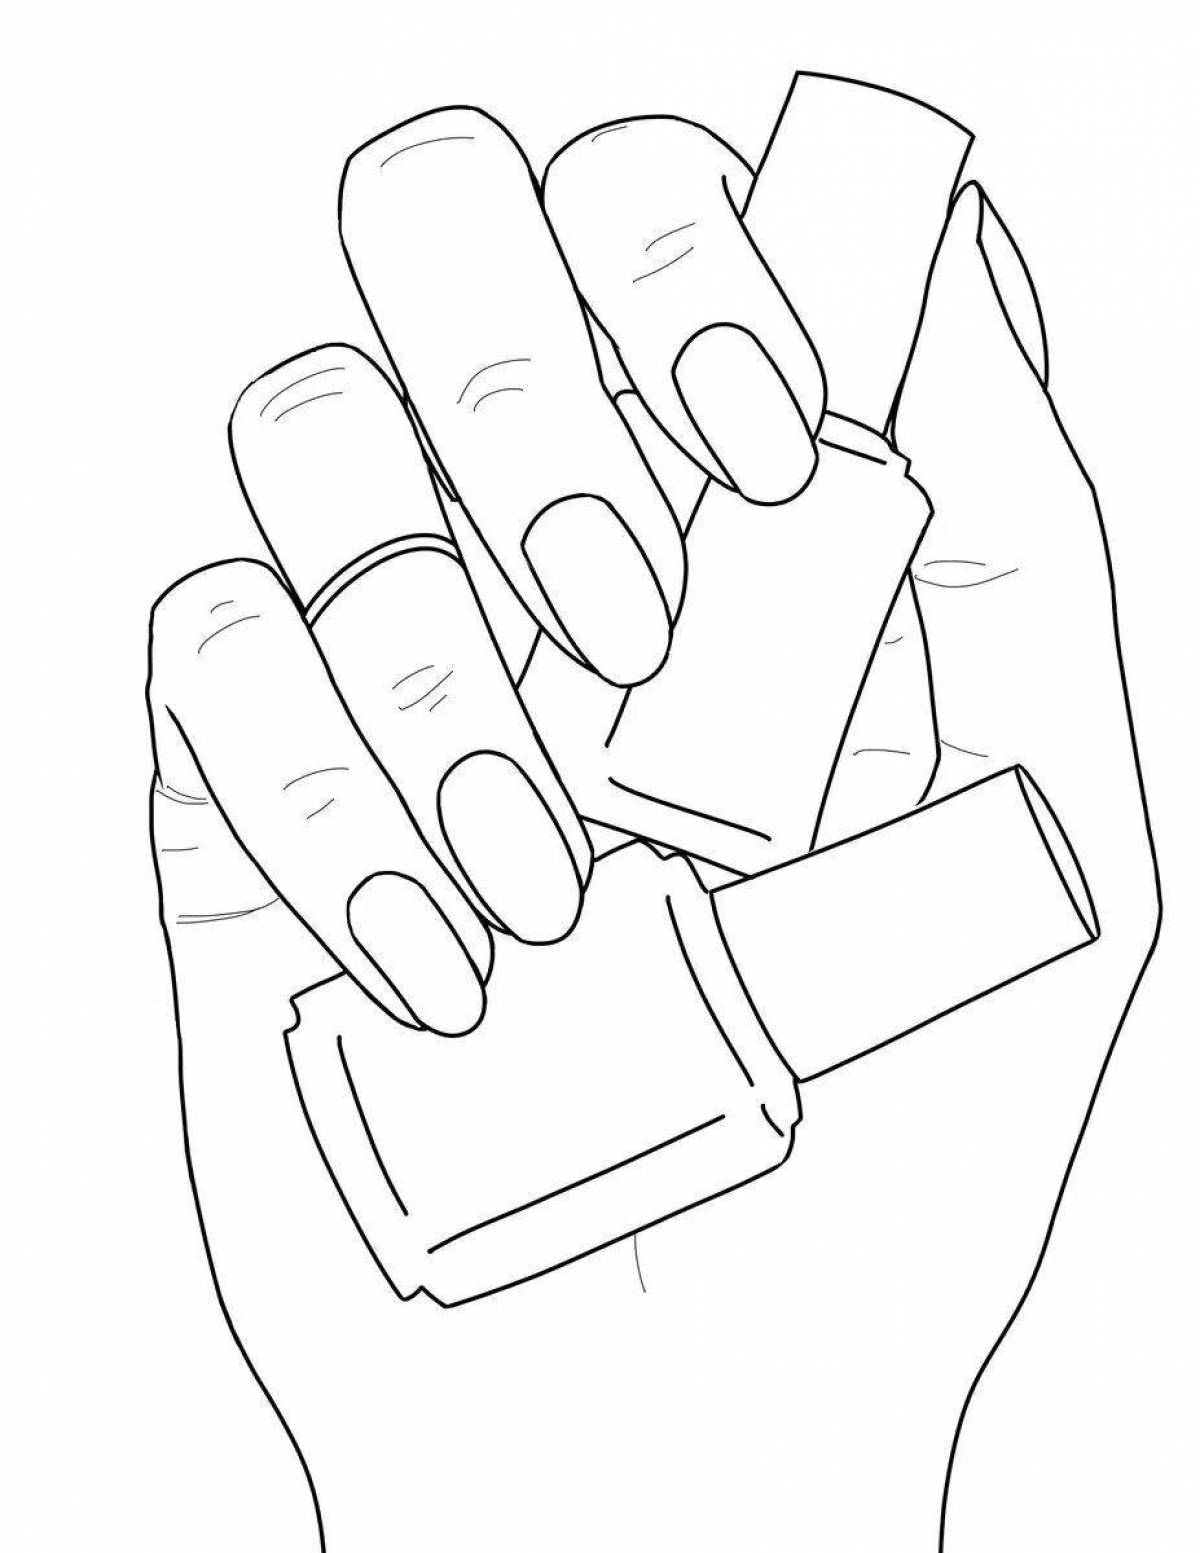 Coloring intensive hand with long nails